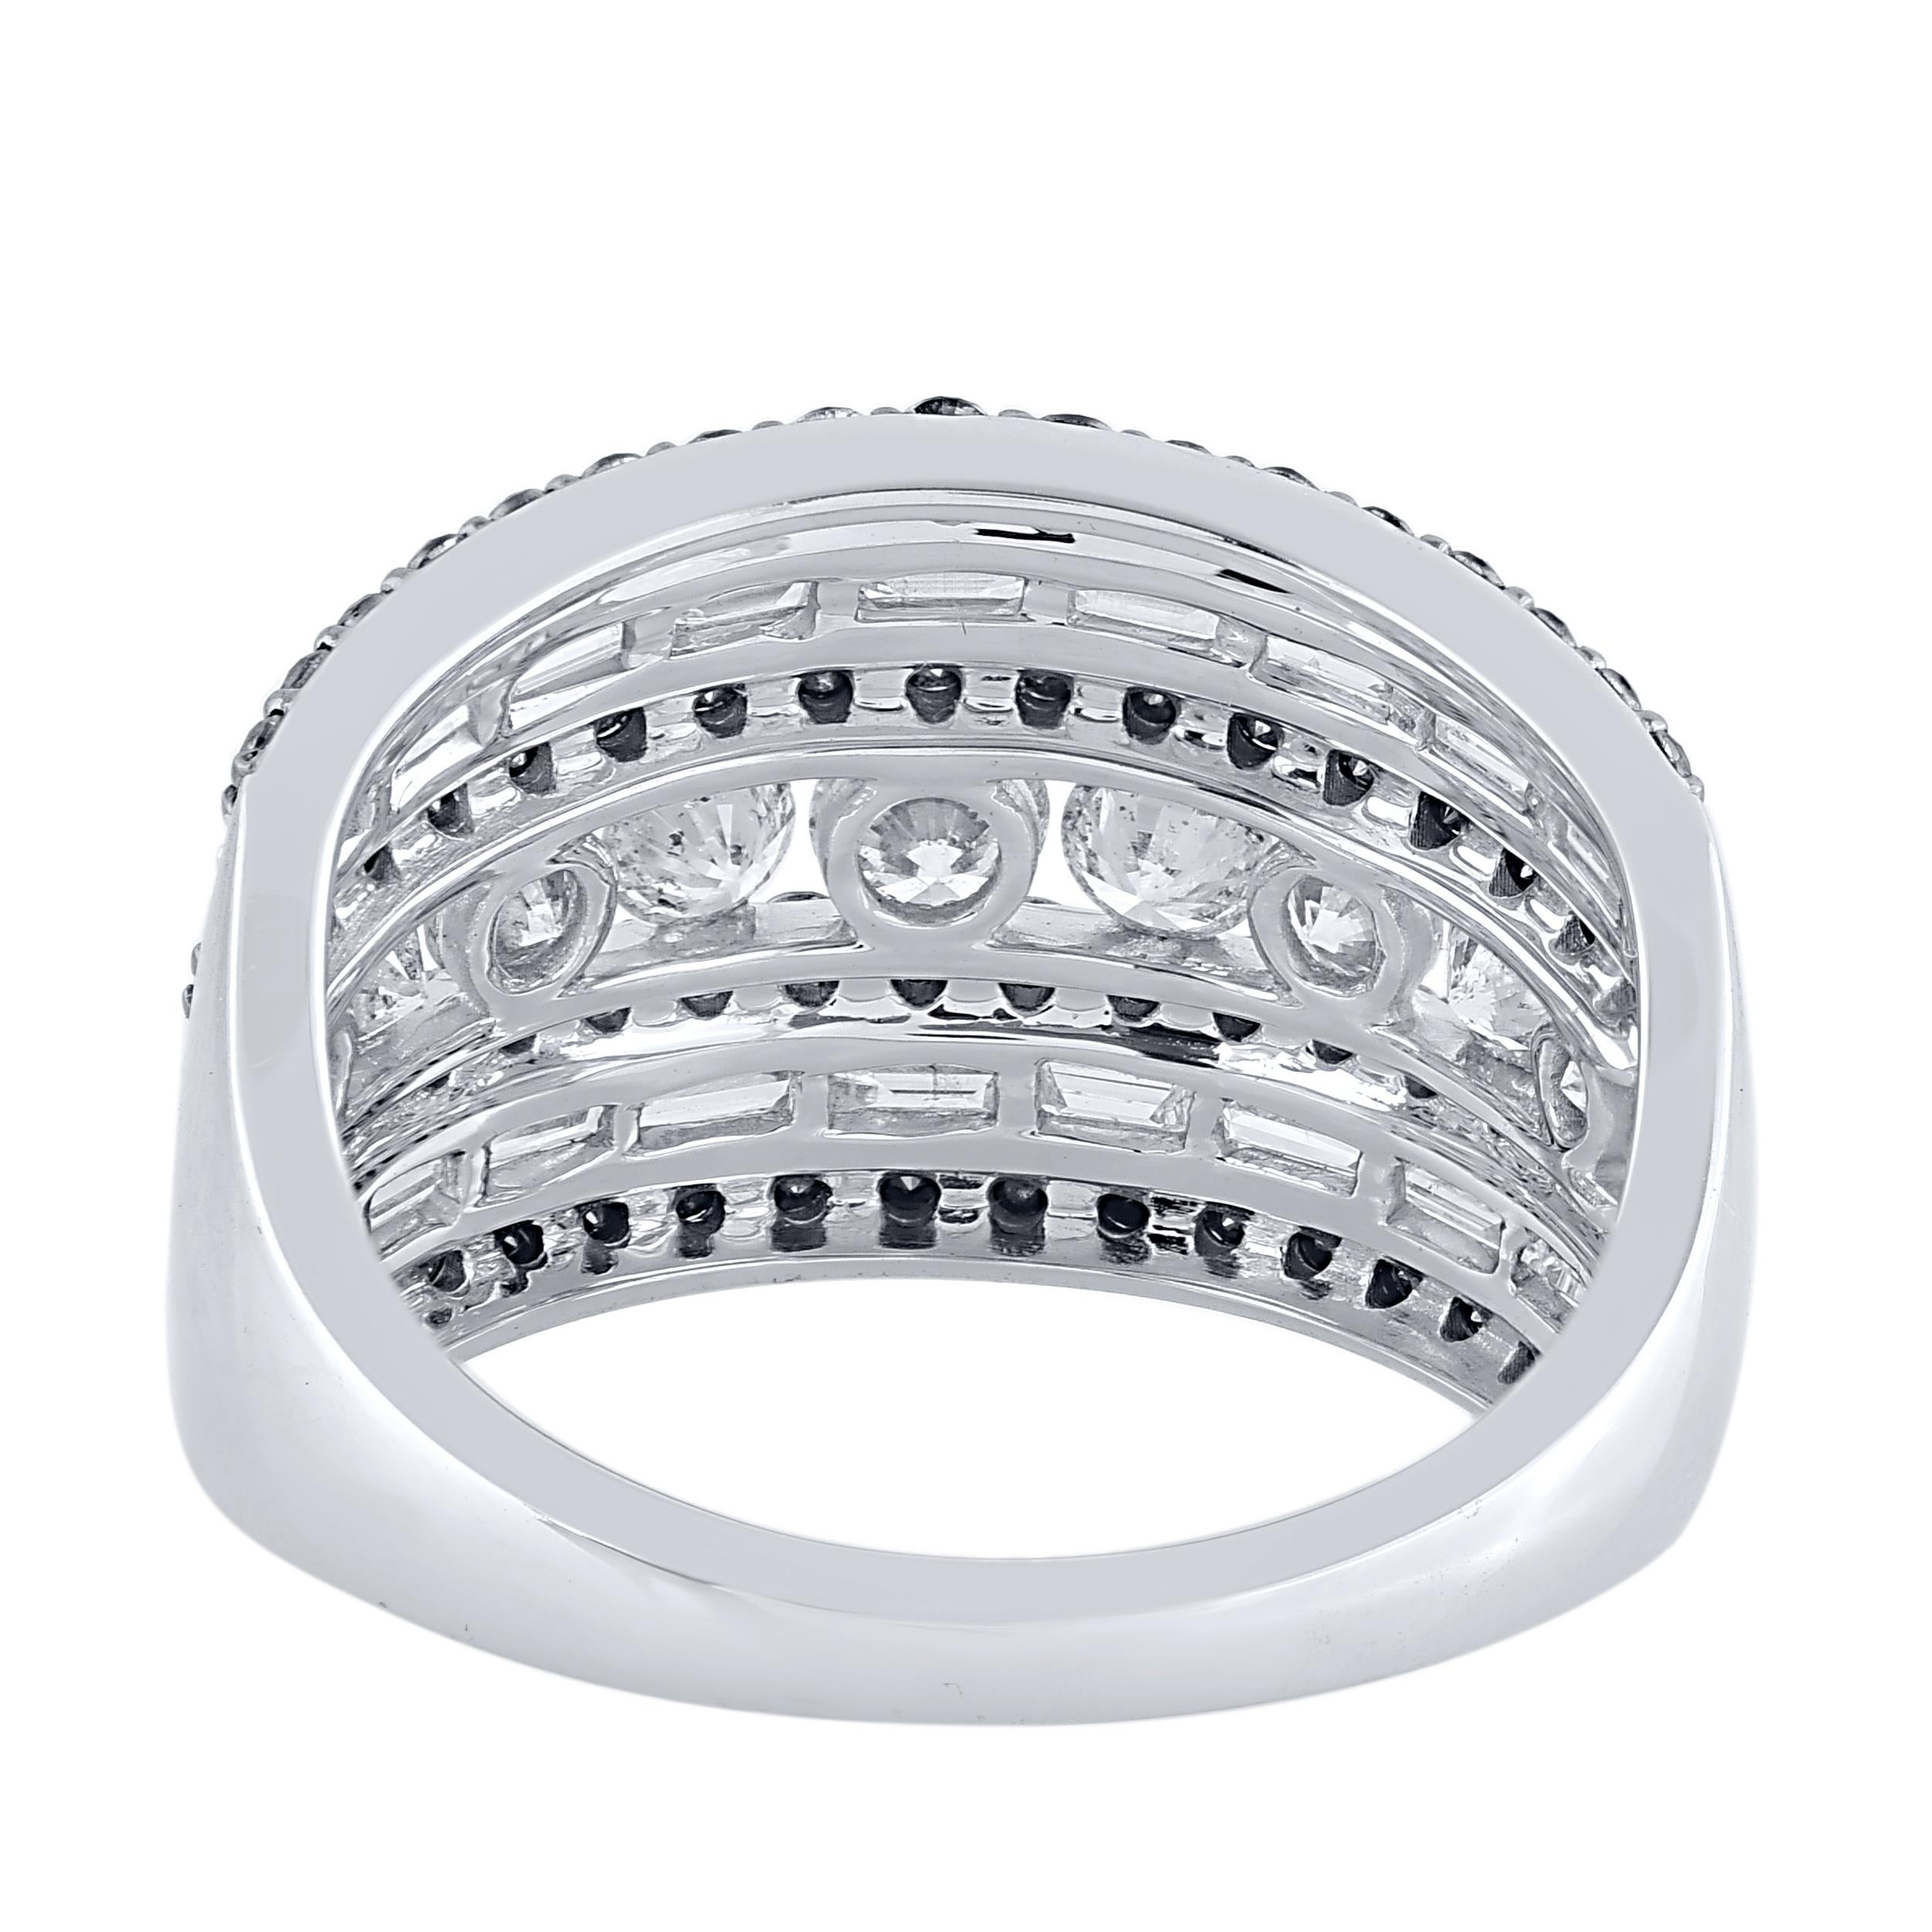 This beautiful multi row wide band ring features shimmering baguette, brilliant cut diamonds and treated black diamond in prong & channel setting. Crafted in 14 karat white gold. The ring is studded with a total of 95 brilliant cut natural round